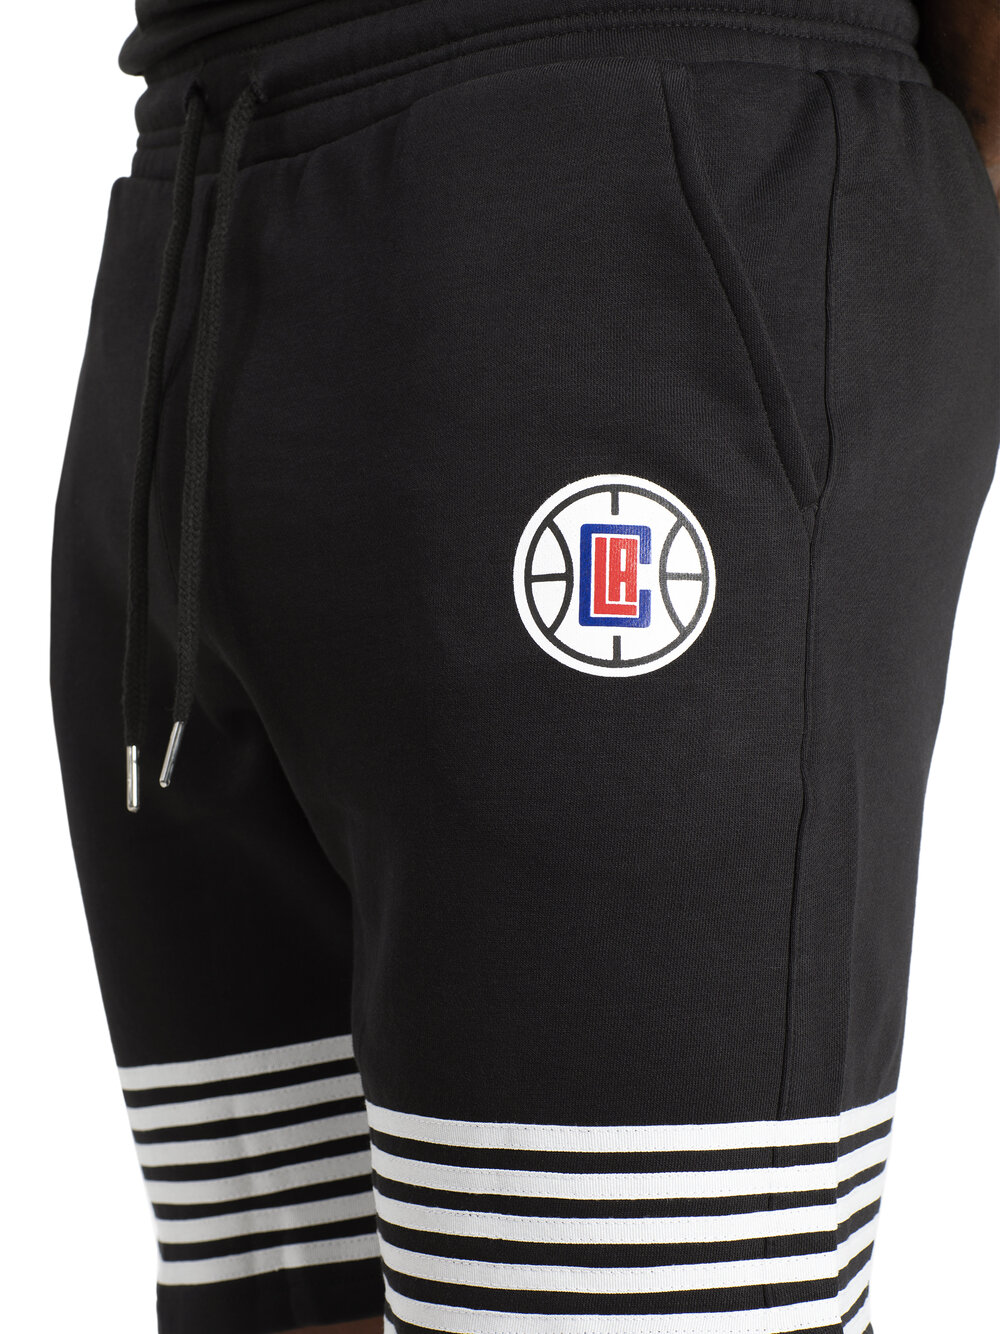 CLIPPERS_SHORTS_3.jpg